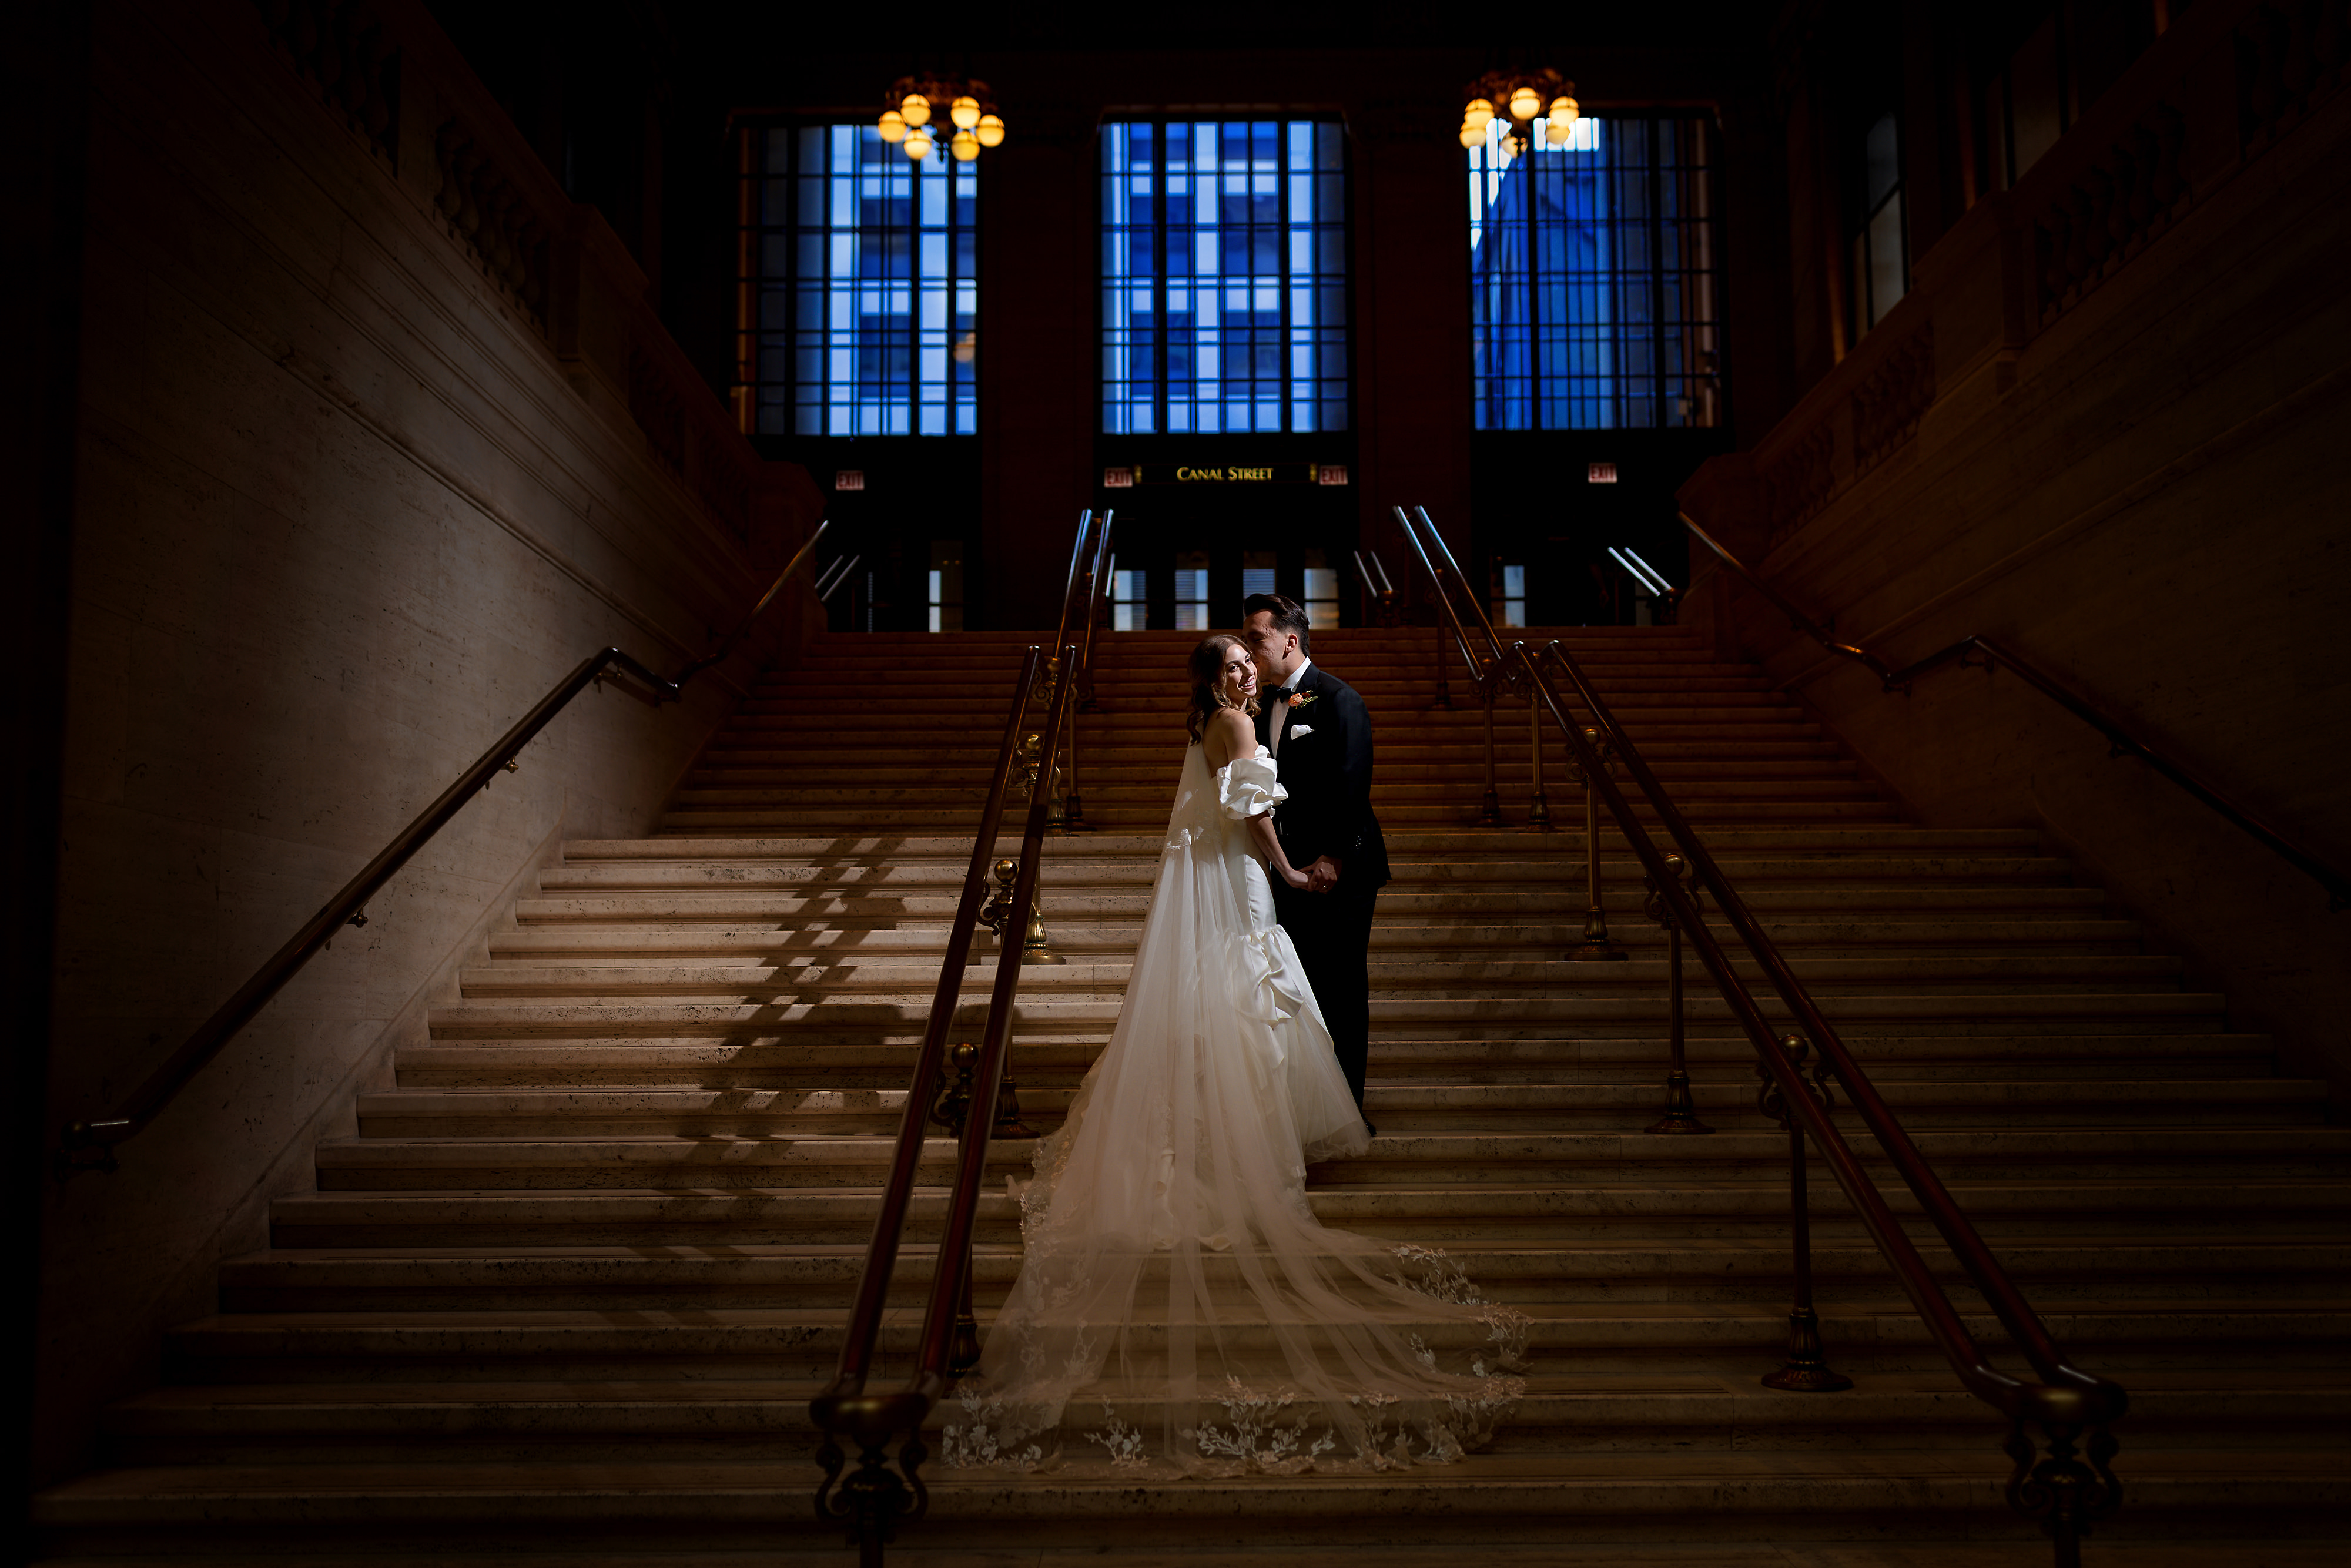 Bride and groom portrait on stairs at Union Station in downtown Chicago